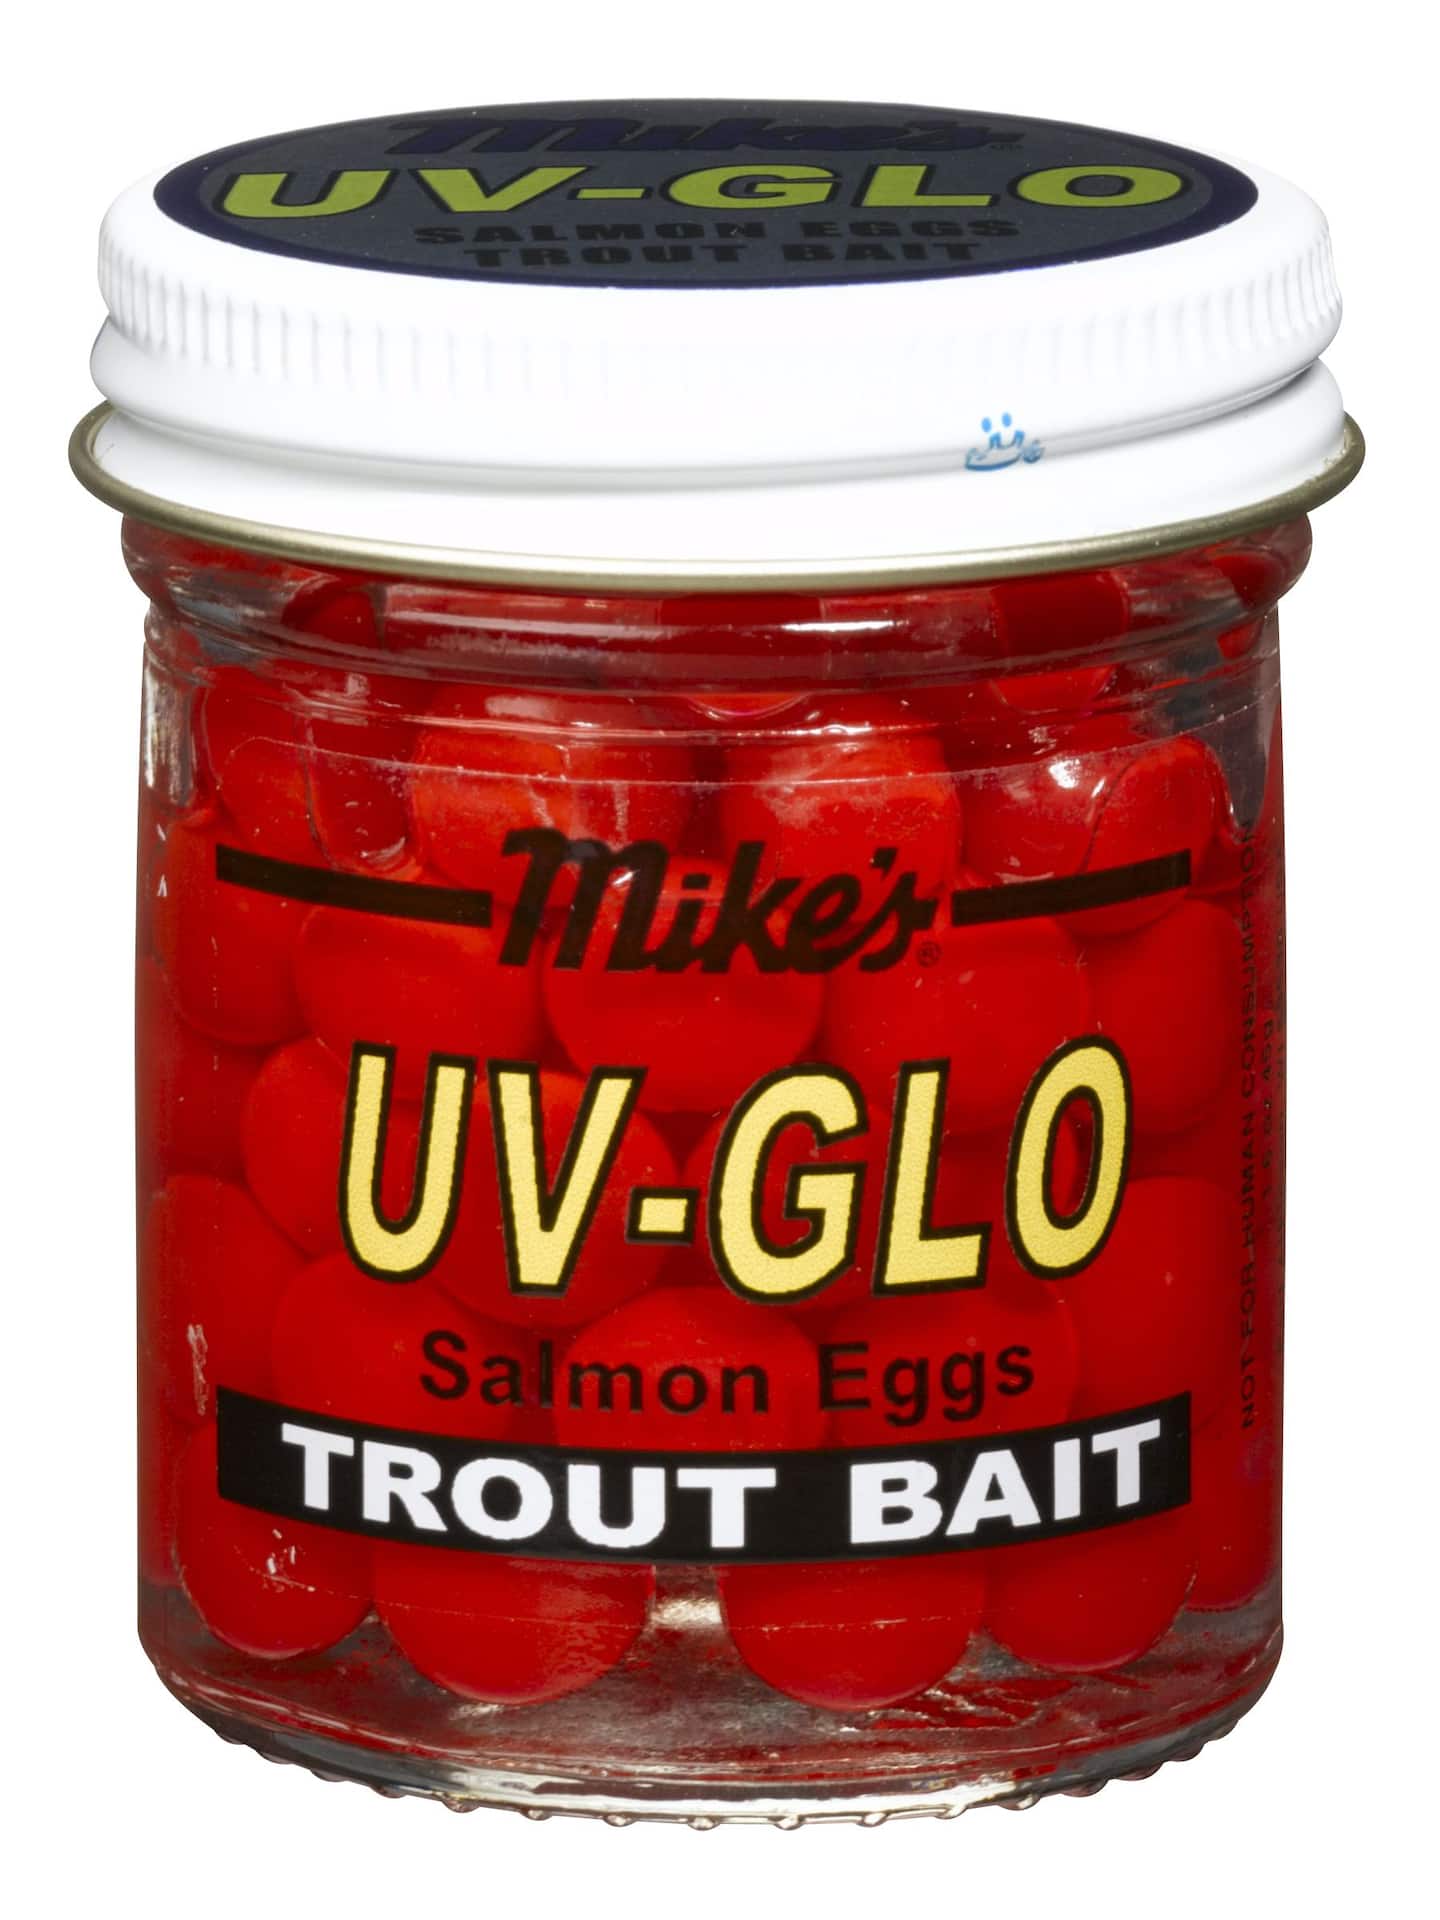 Mike's Ultraviolet Glow Salmon Eggs